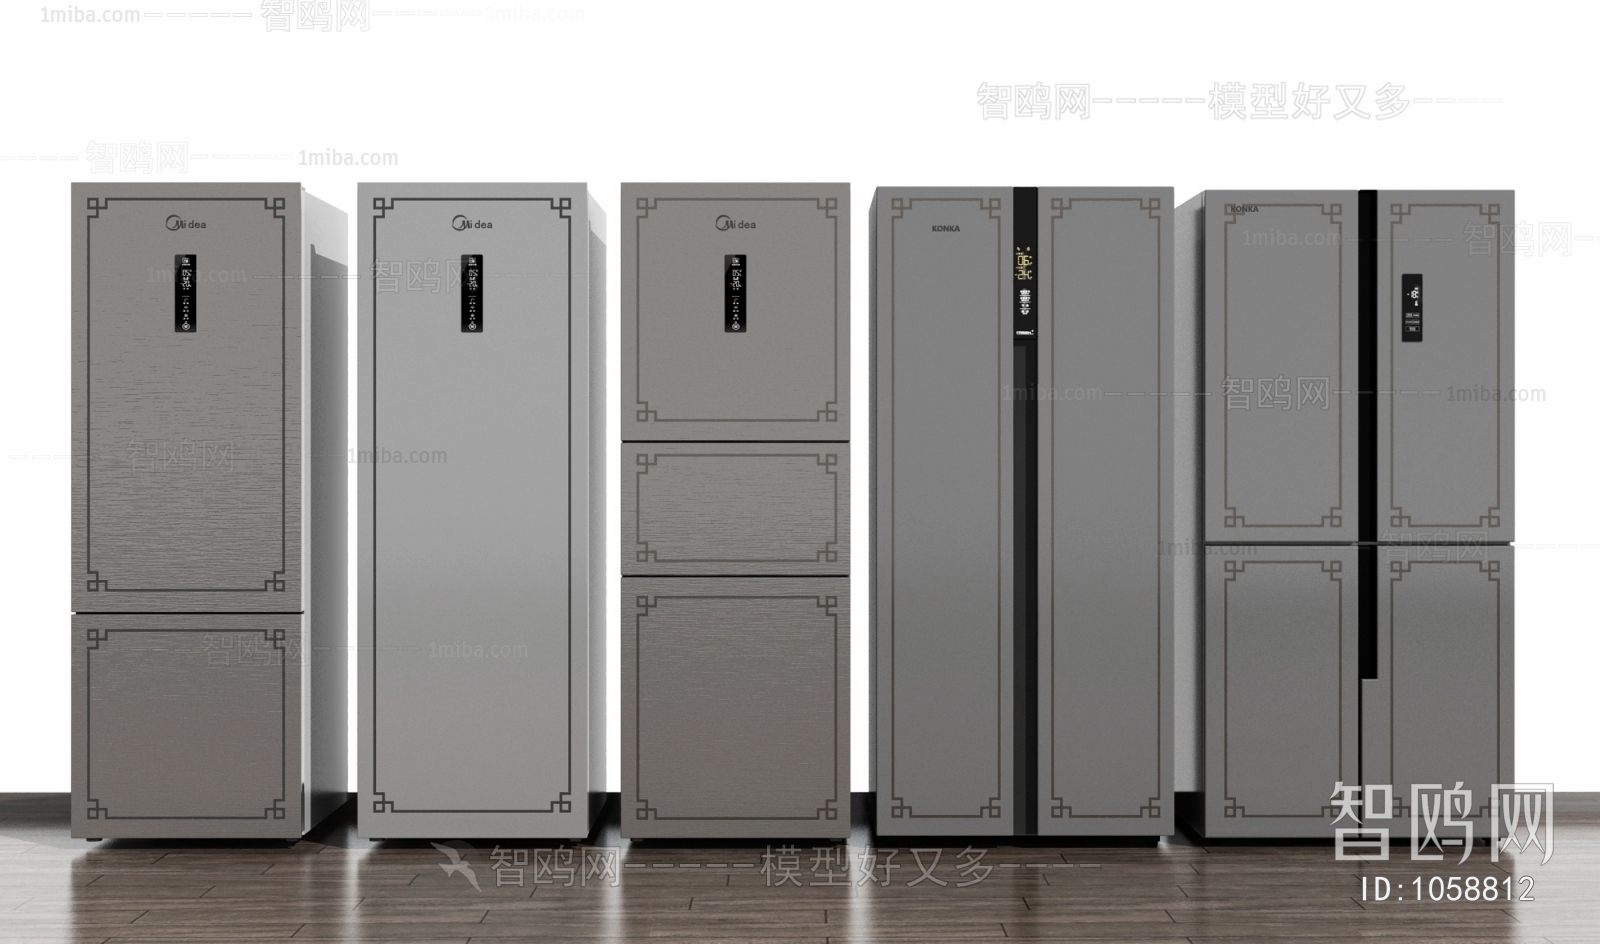 New Chinese Style Home Appliance Refrigerator